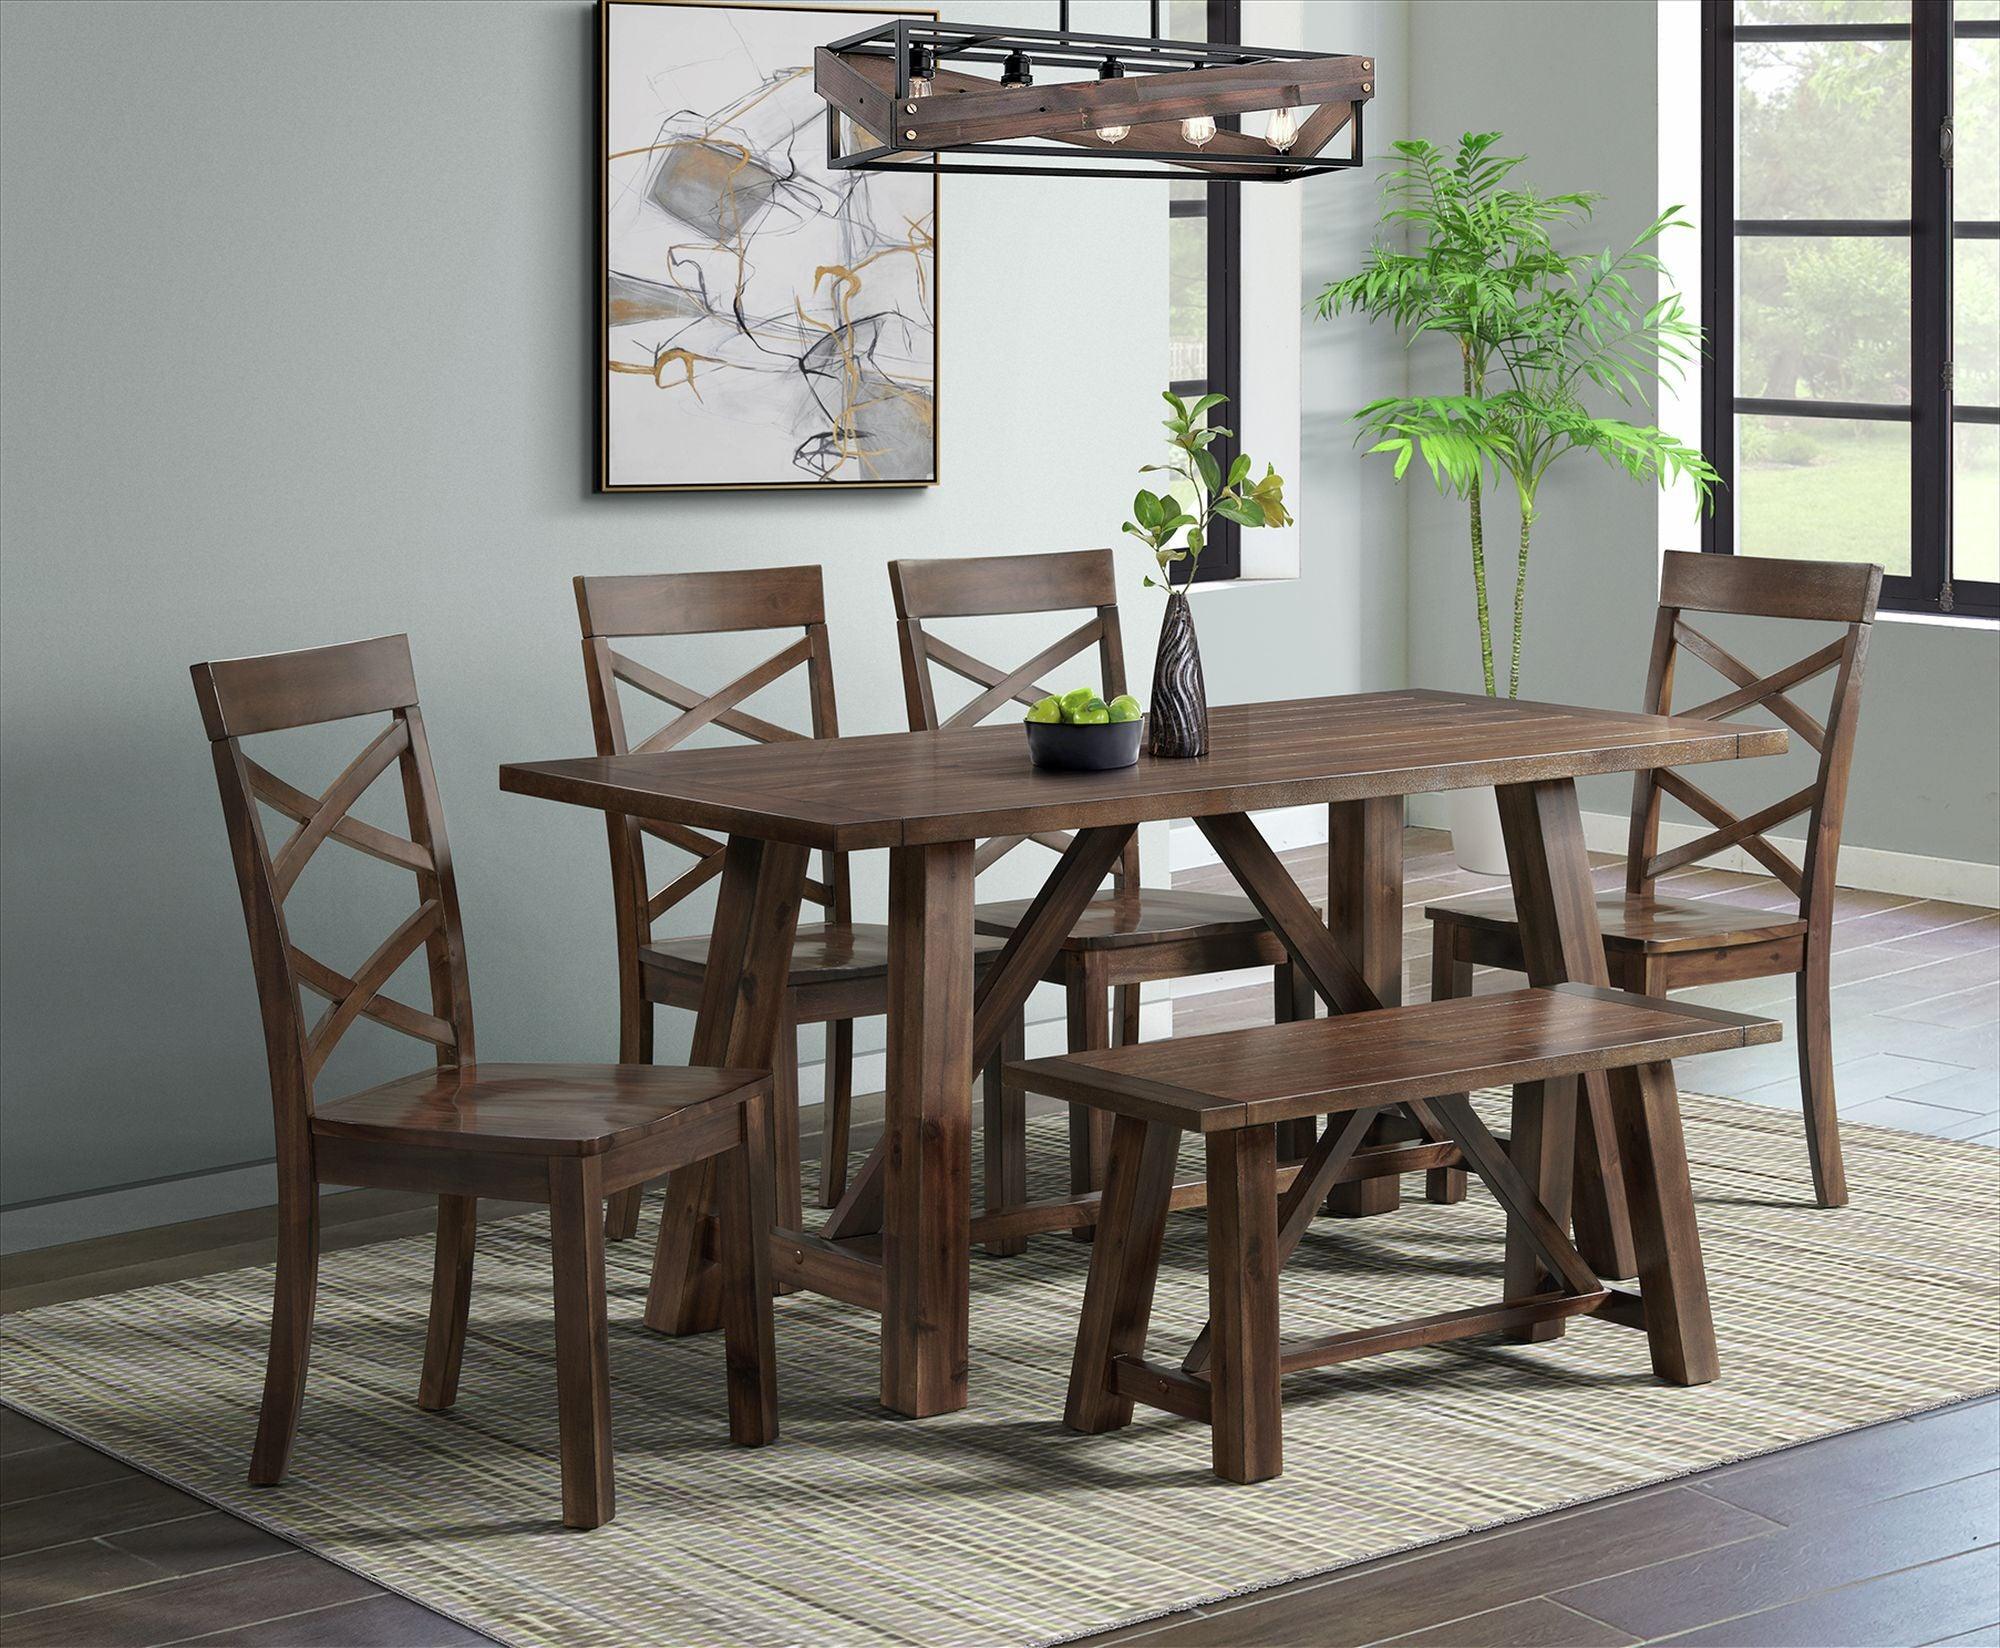 Elements Dining Chairs - Regan Standard Height Side Chair Set in Cherry